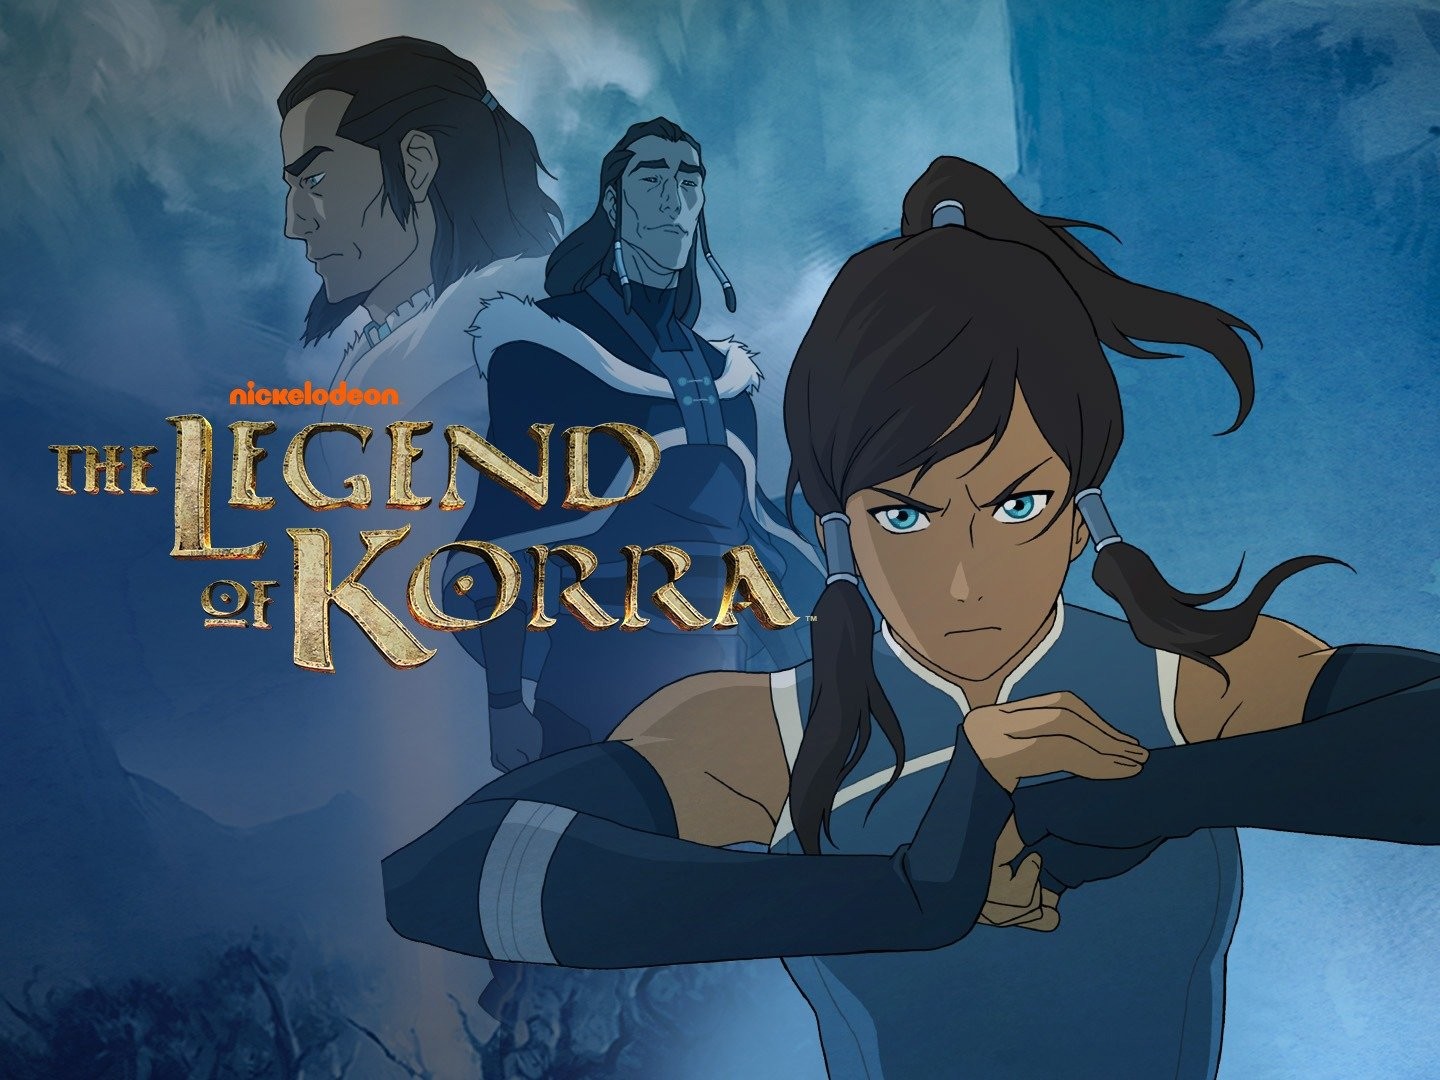 The Best of Avatar: The Last Airbender and Legend of Korra